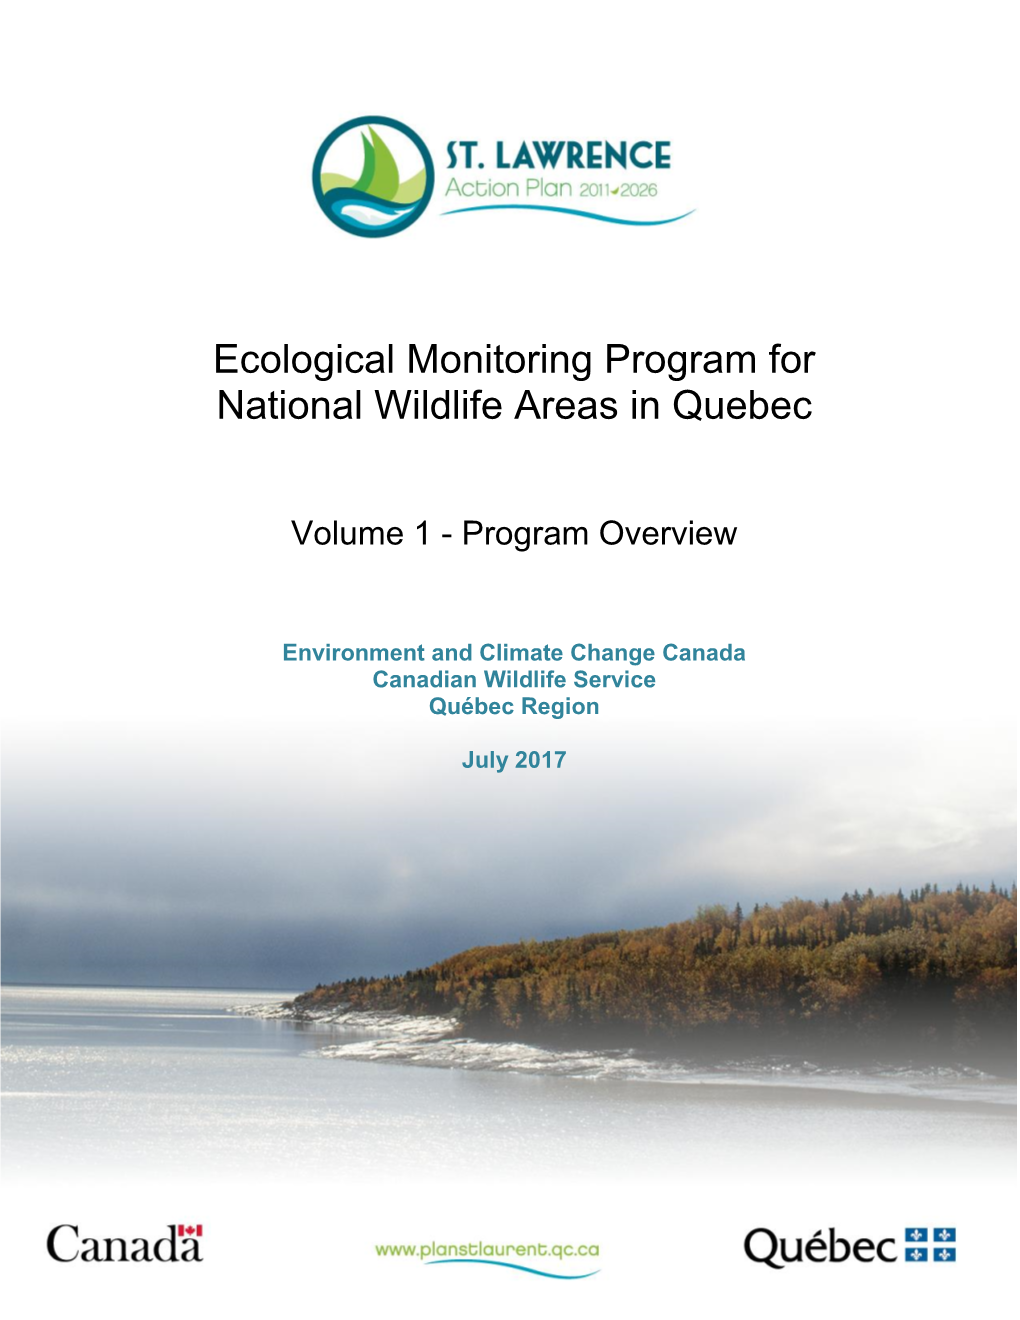 Ecological Monitoring Program for National Wildlife Areas in Quebec